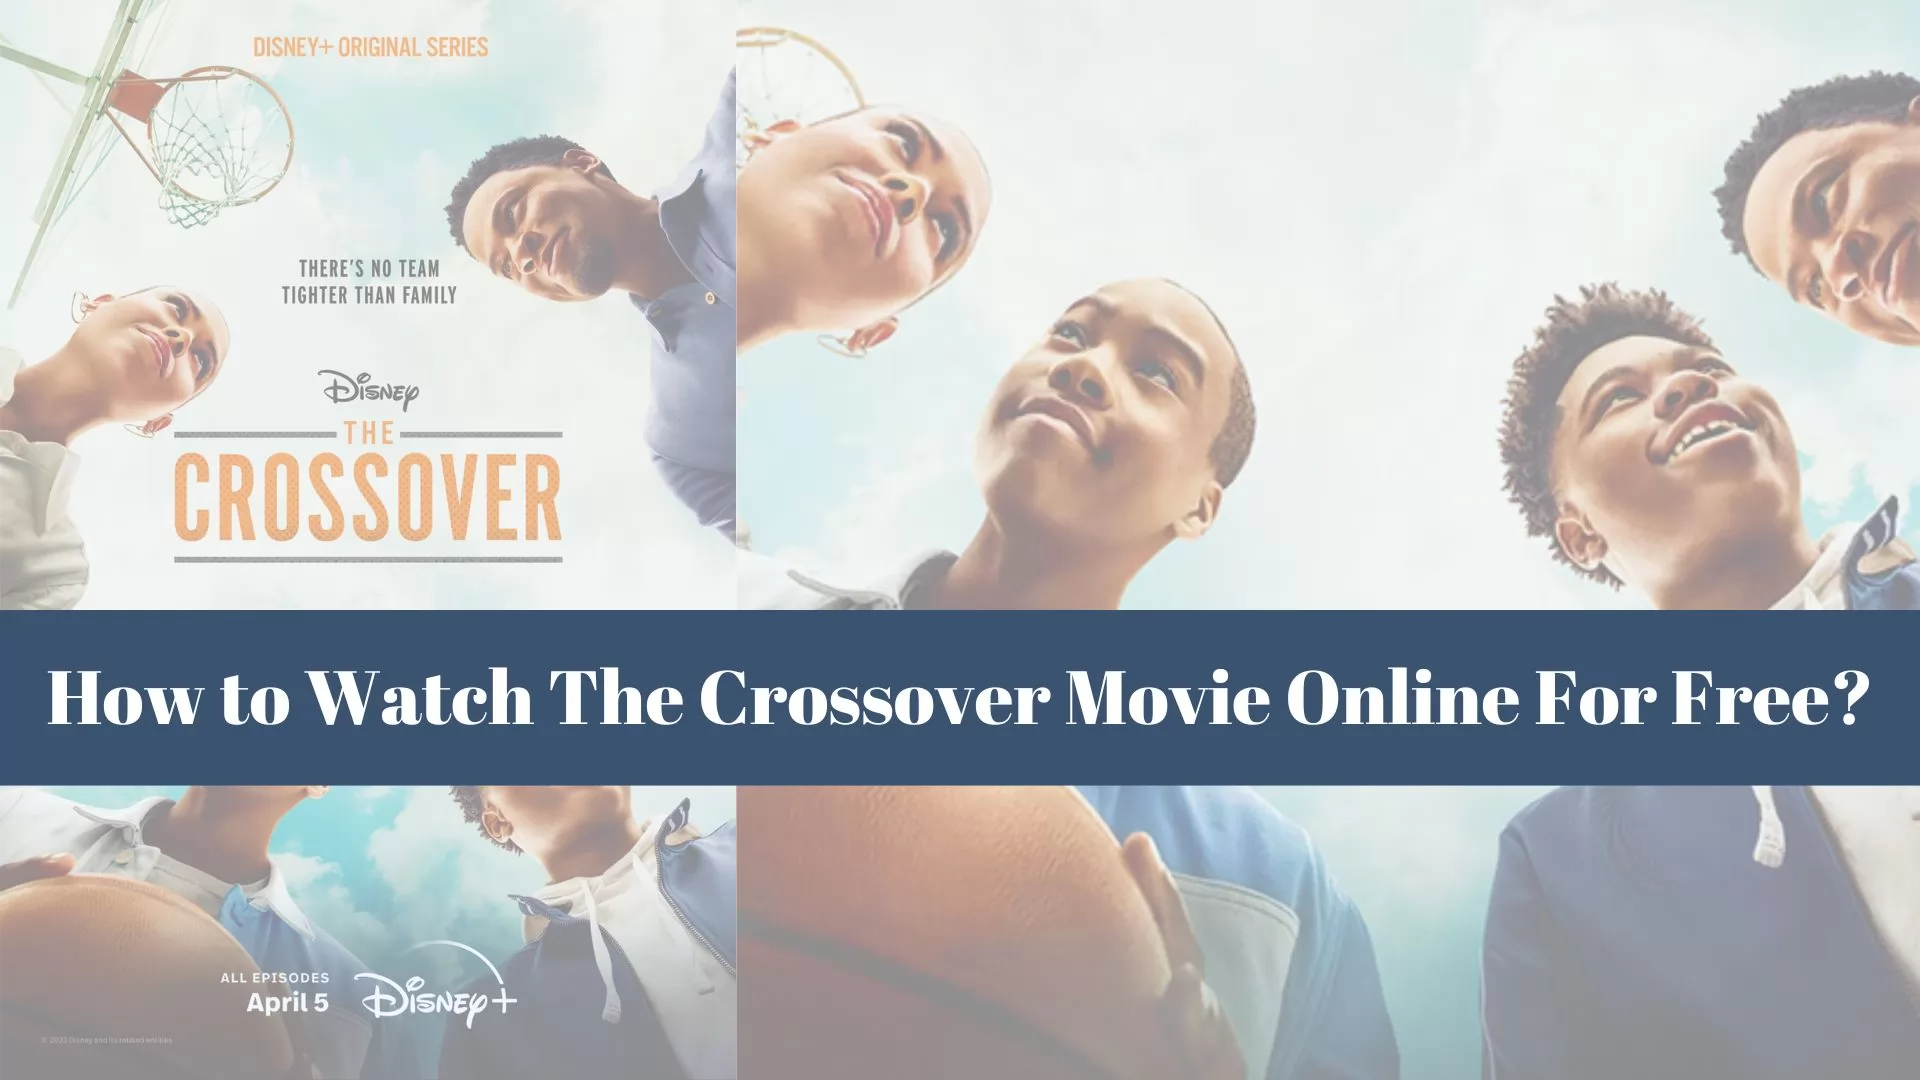 How to Watch The Crossover Movie Online For Free?